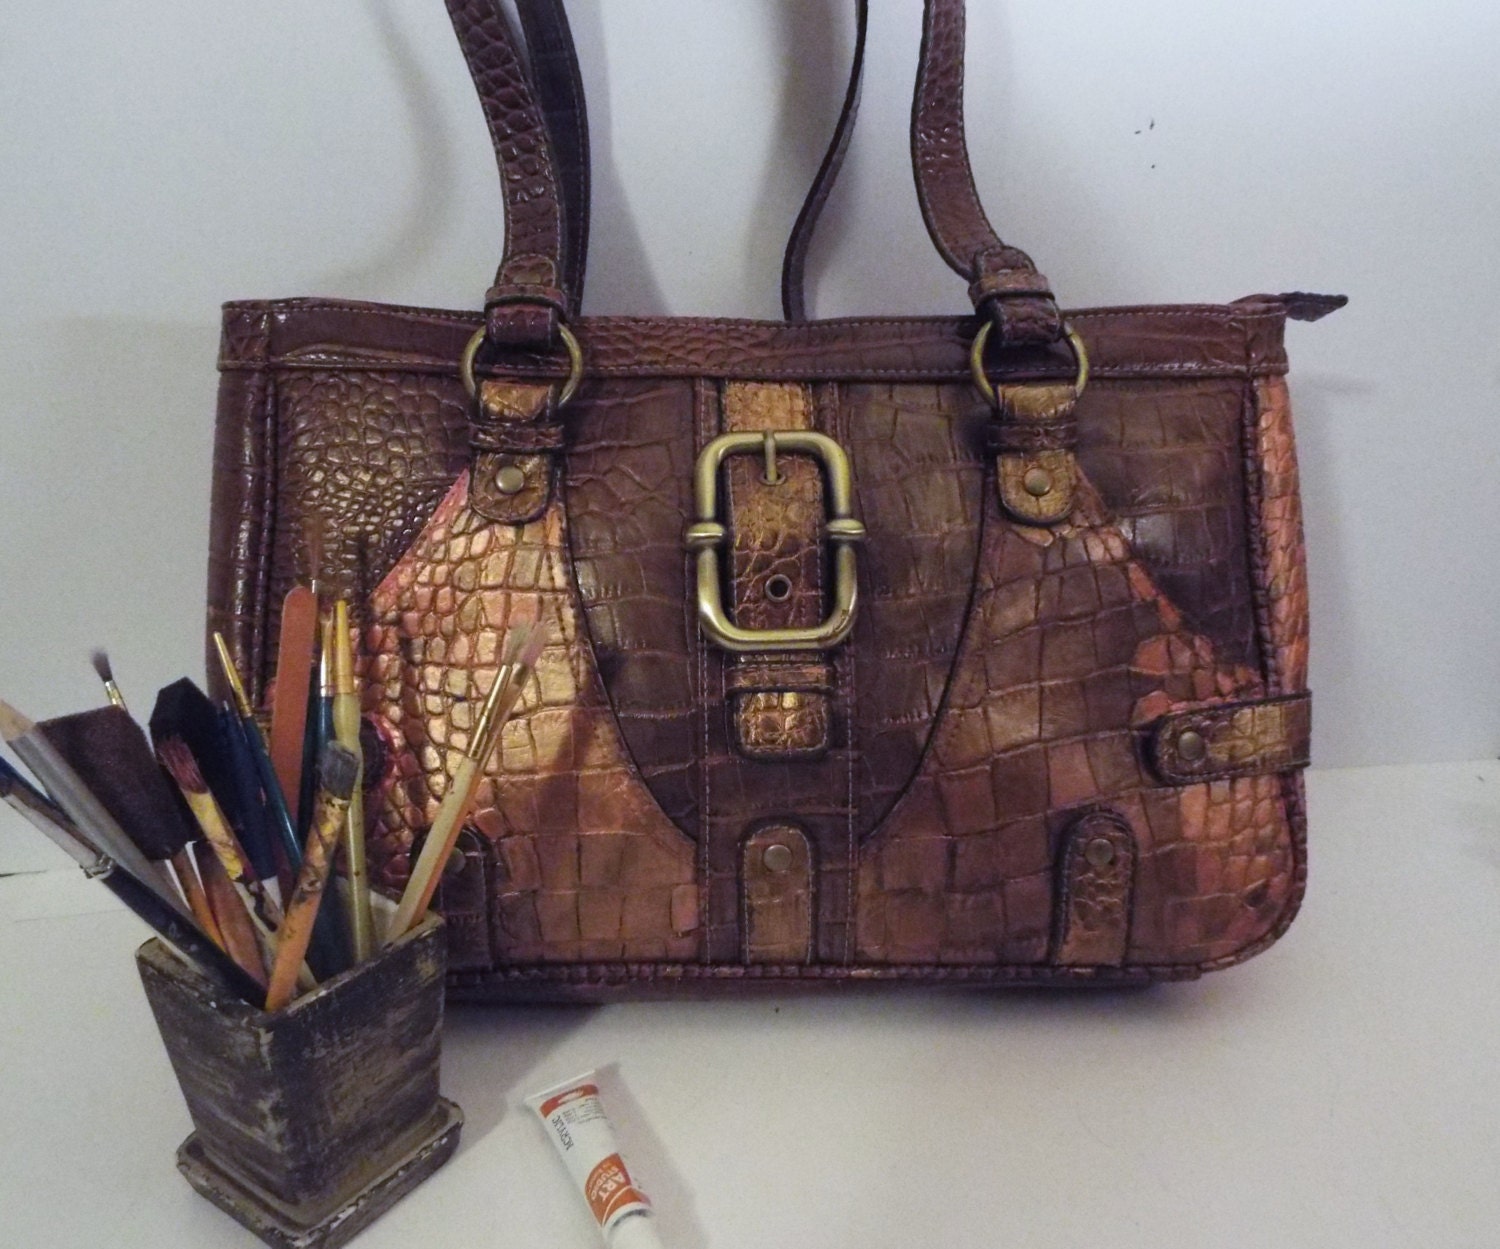 CLEARANCE Eco Leather Tote Bag Hand Painted Snakeskin Design